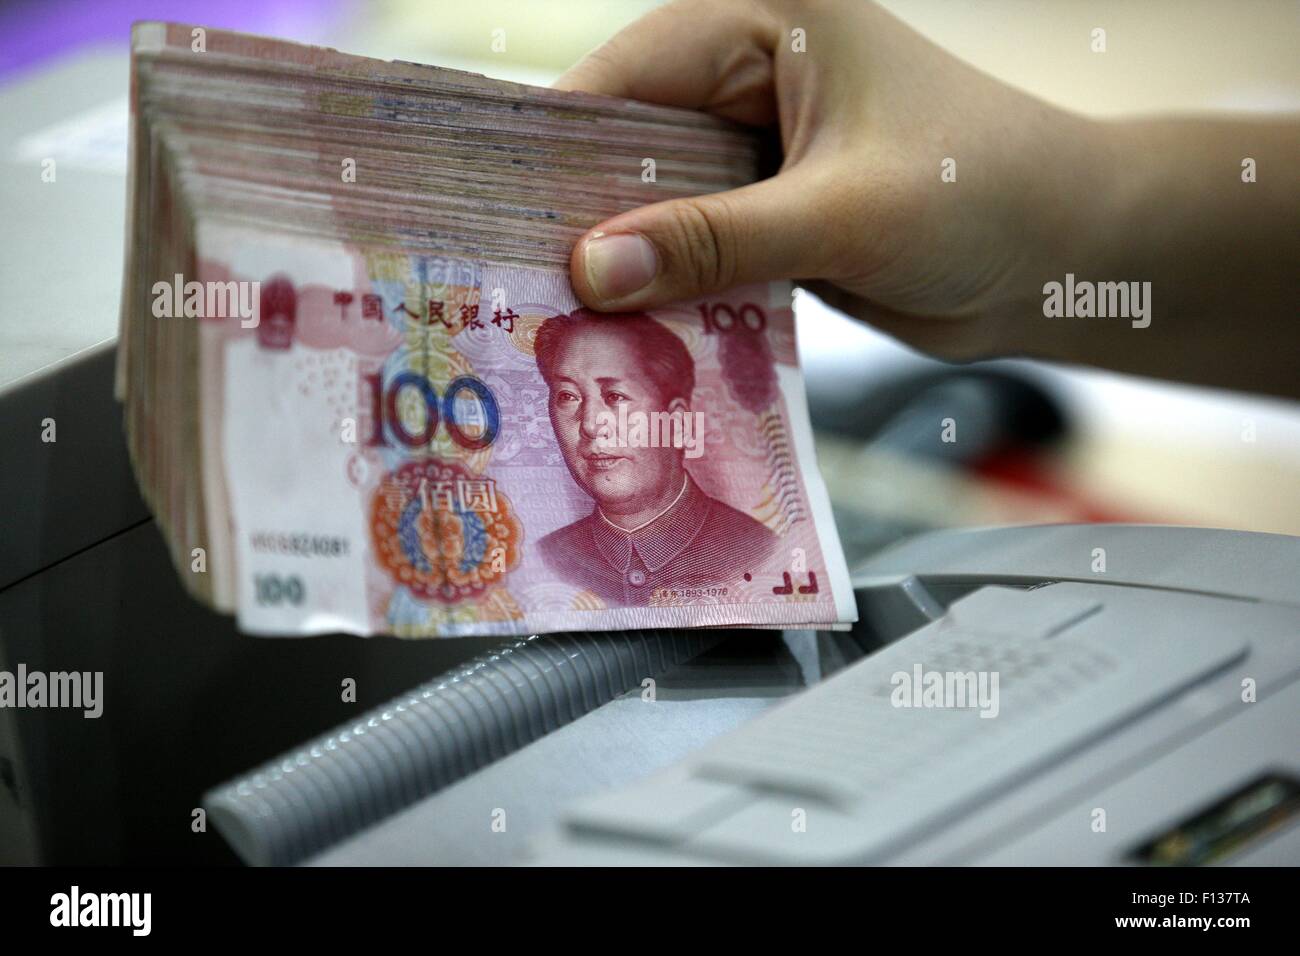 A worker counts Chinese currency Renminbi (RMB) at a bank in Hauibei, east China's Anhui Province, Aug 26, 2015. China's yuan fe Stock Photo